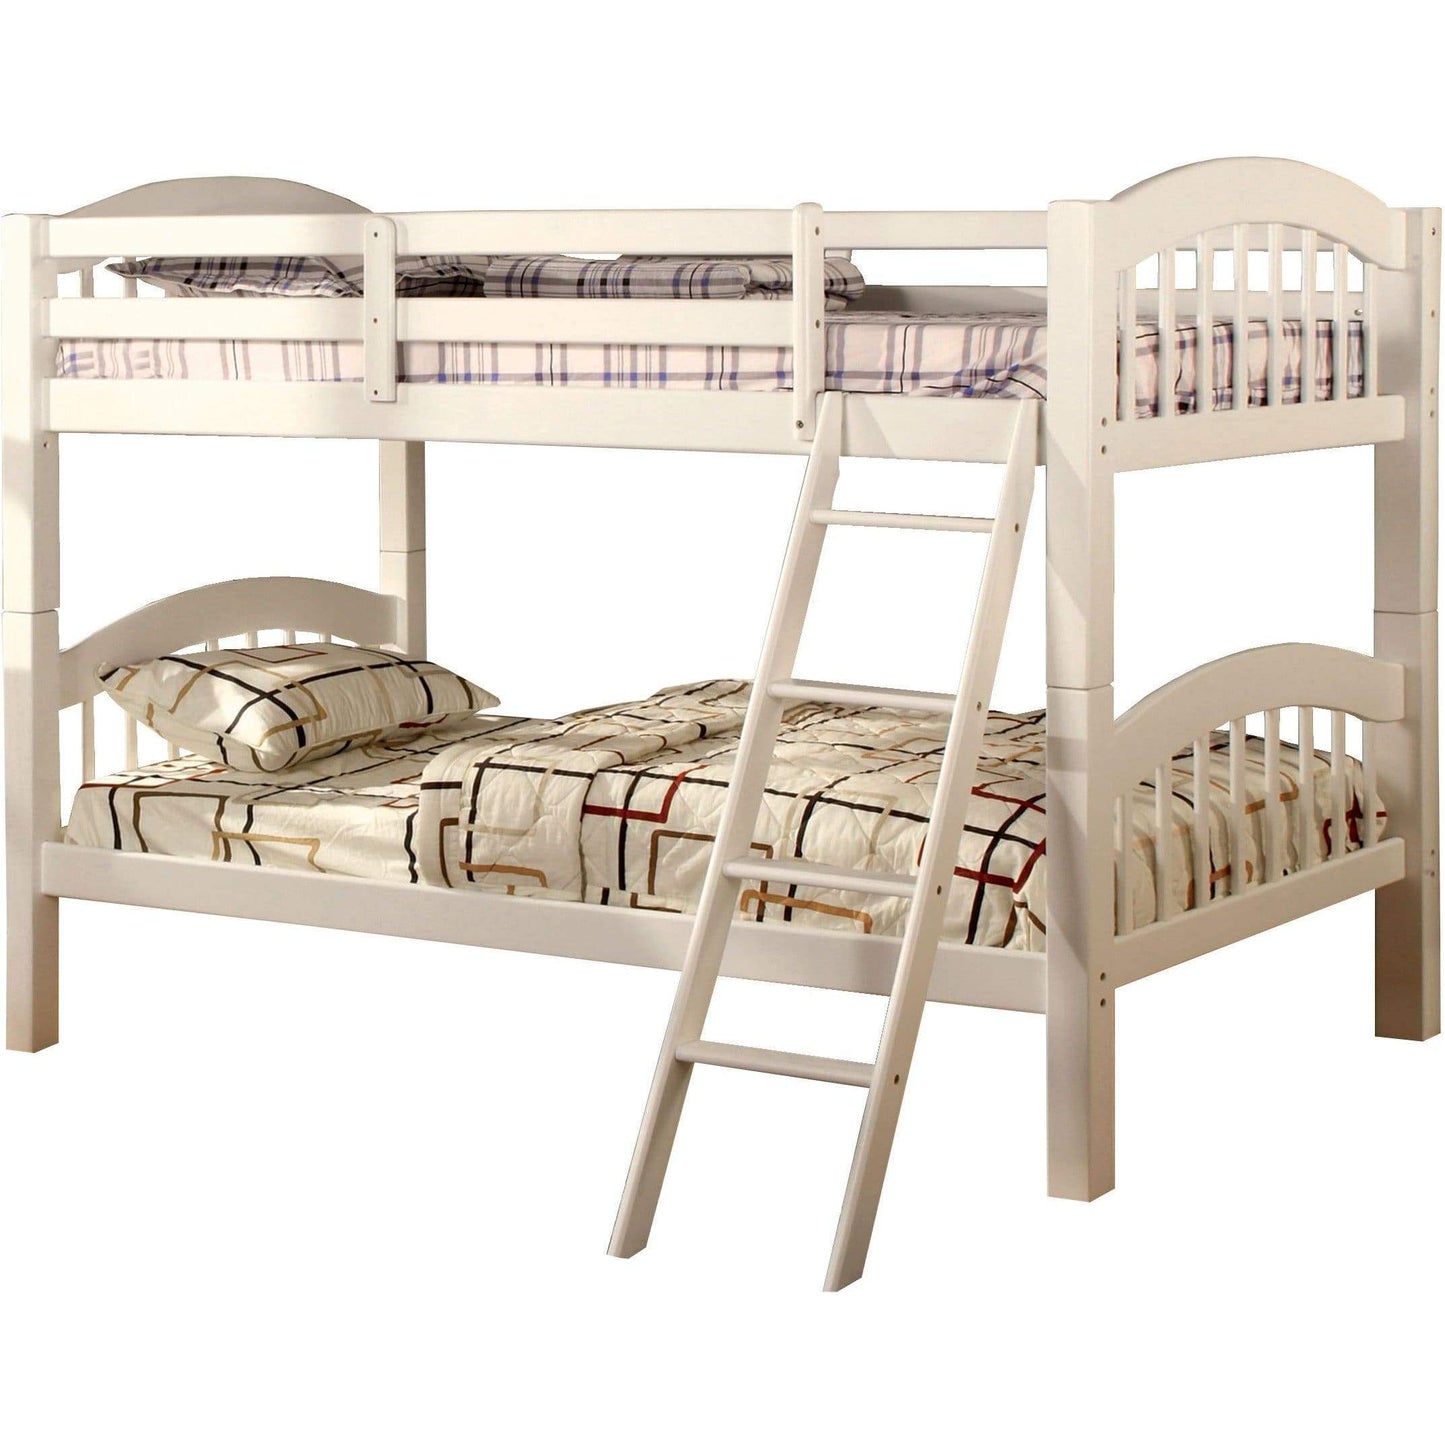 Furniture of America bunk bed twin/ twin Rayelle Cottage Twin over Twin Bunk Bed